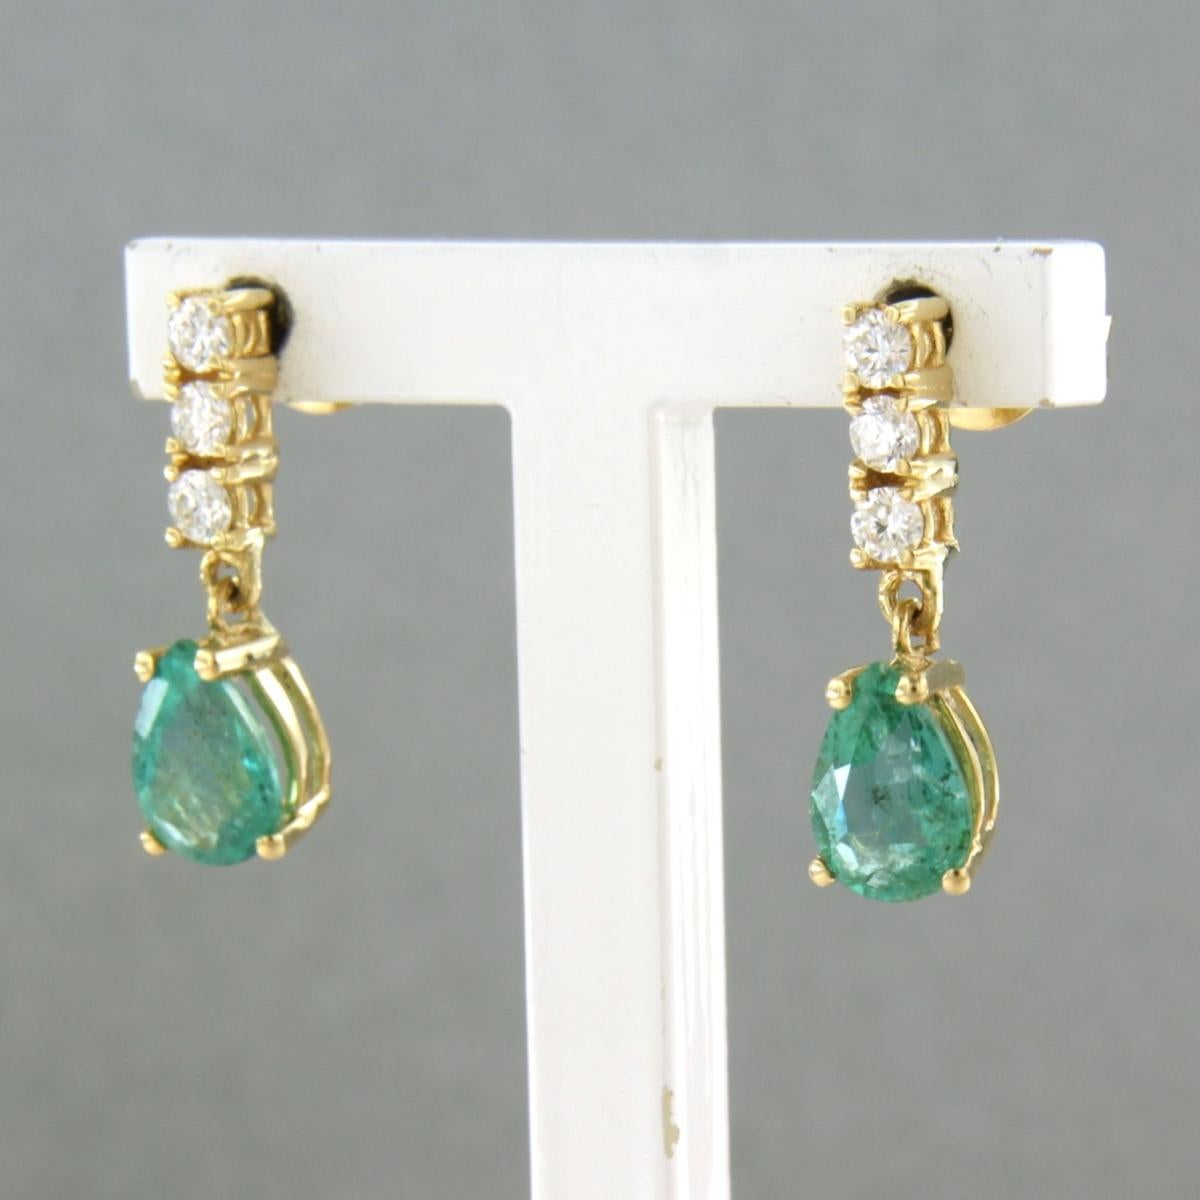 Brilliant Cut Earrings with emerald and diamonds 18k yellow gold For Sale